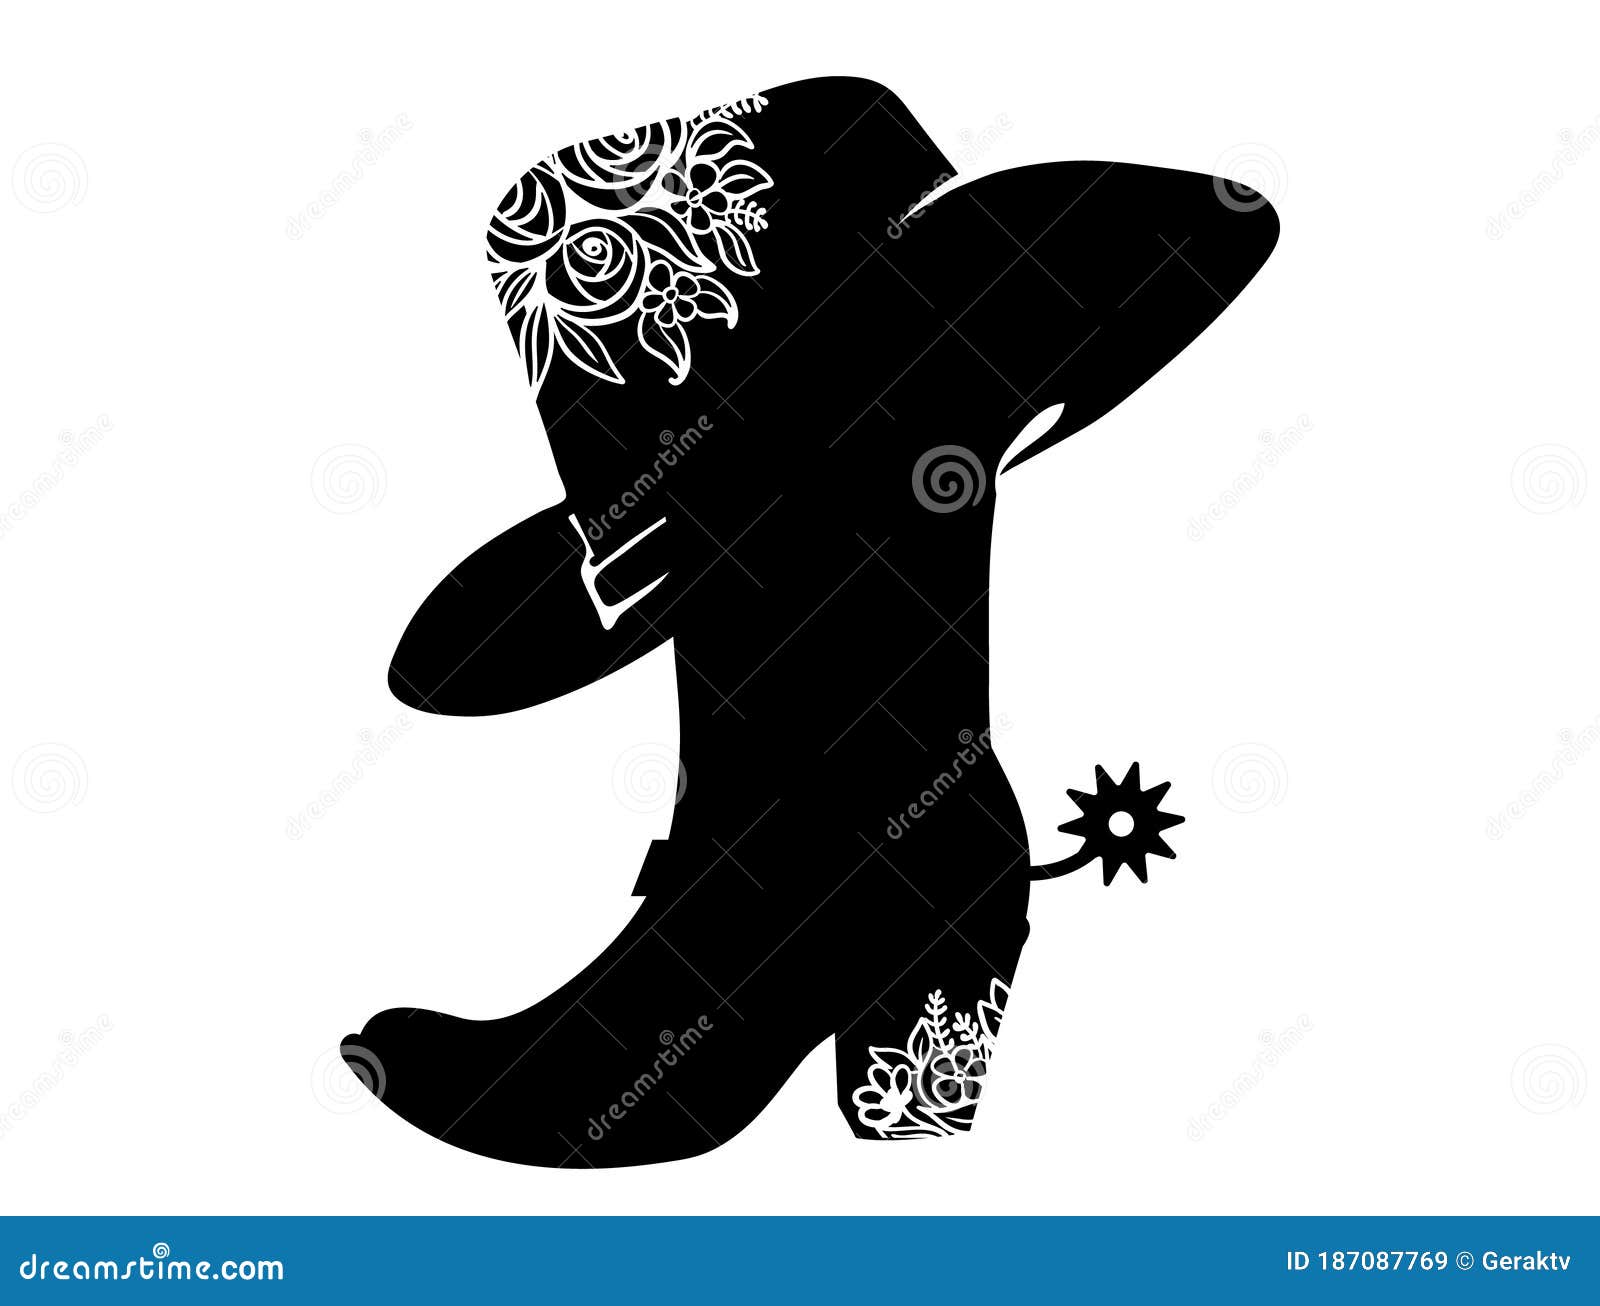 cowboy boot black silhouette for text or decoration.  cowgirl party printable   on white. western boot